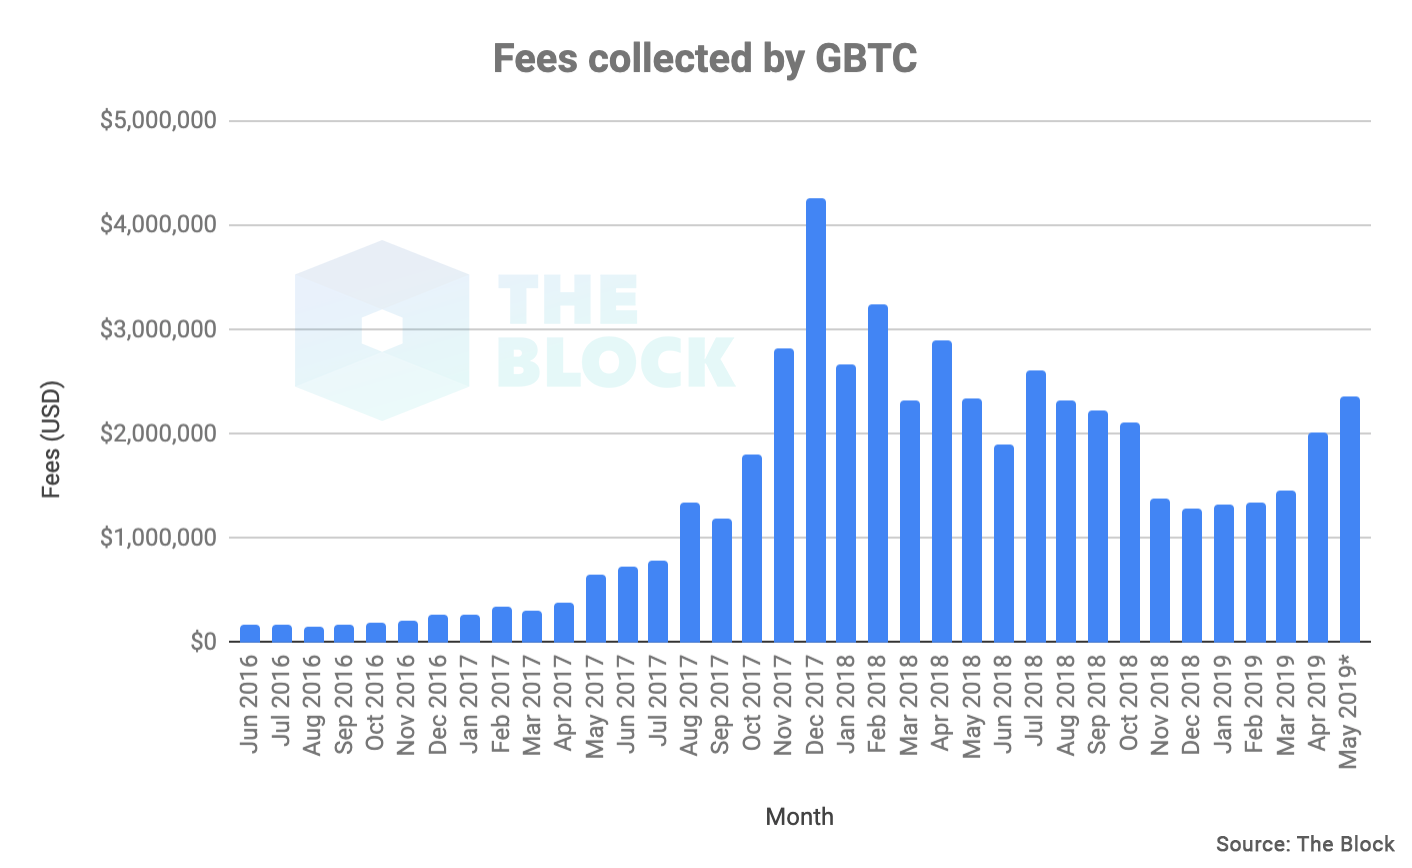 As the number of transactions on Bitcoin grows, the transaction value shrinks